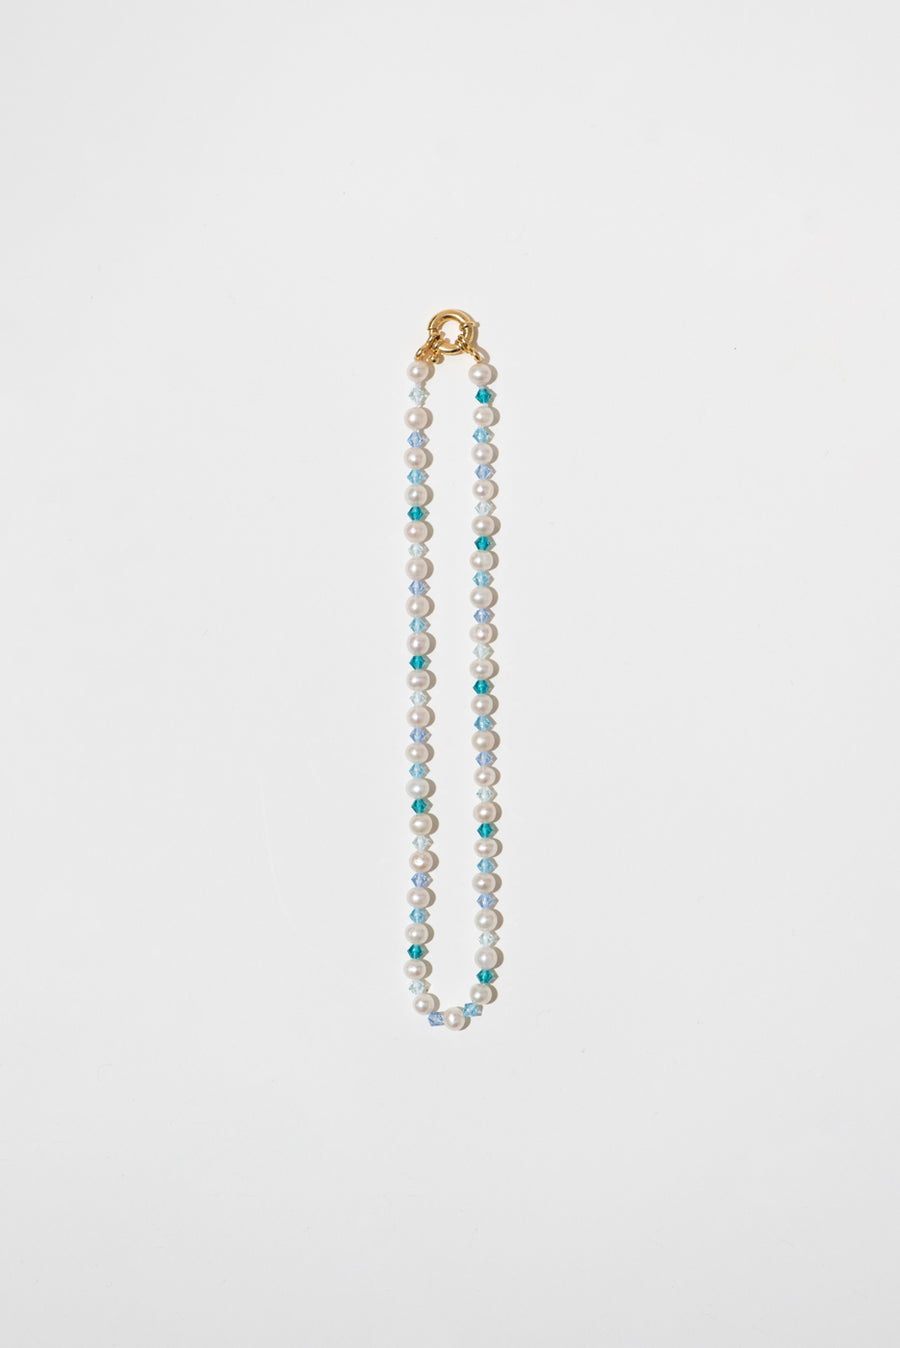 The Ocean Pearl Necklace